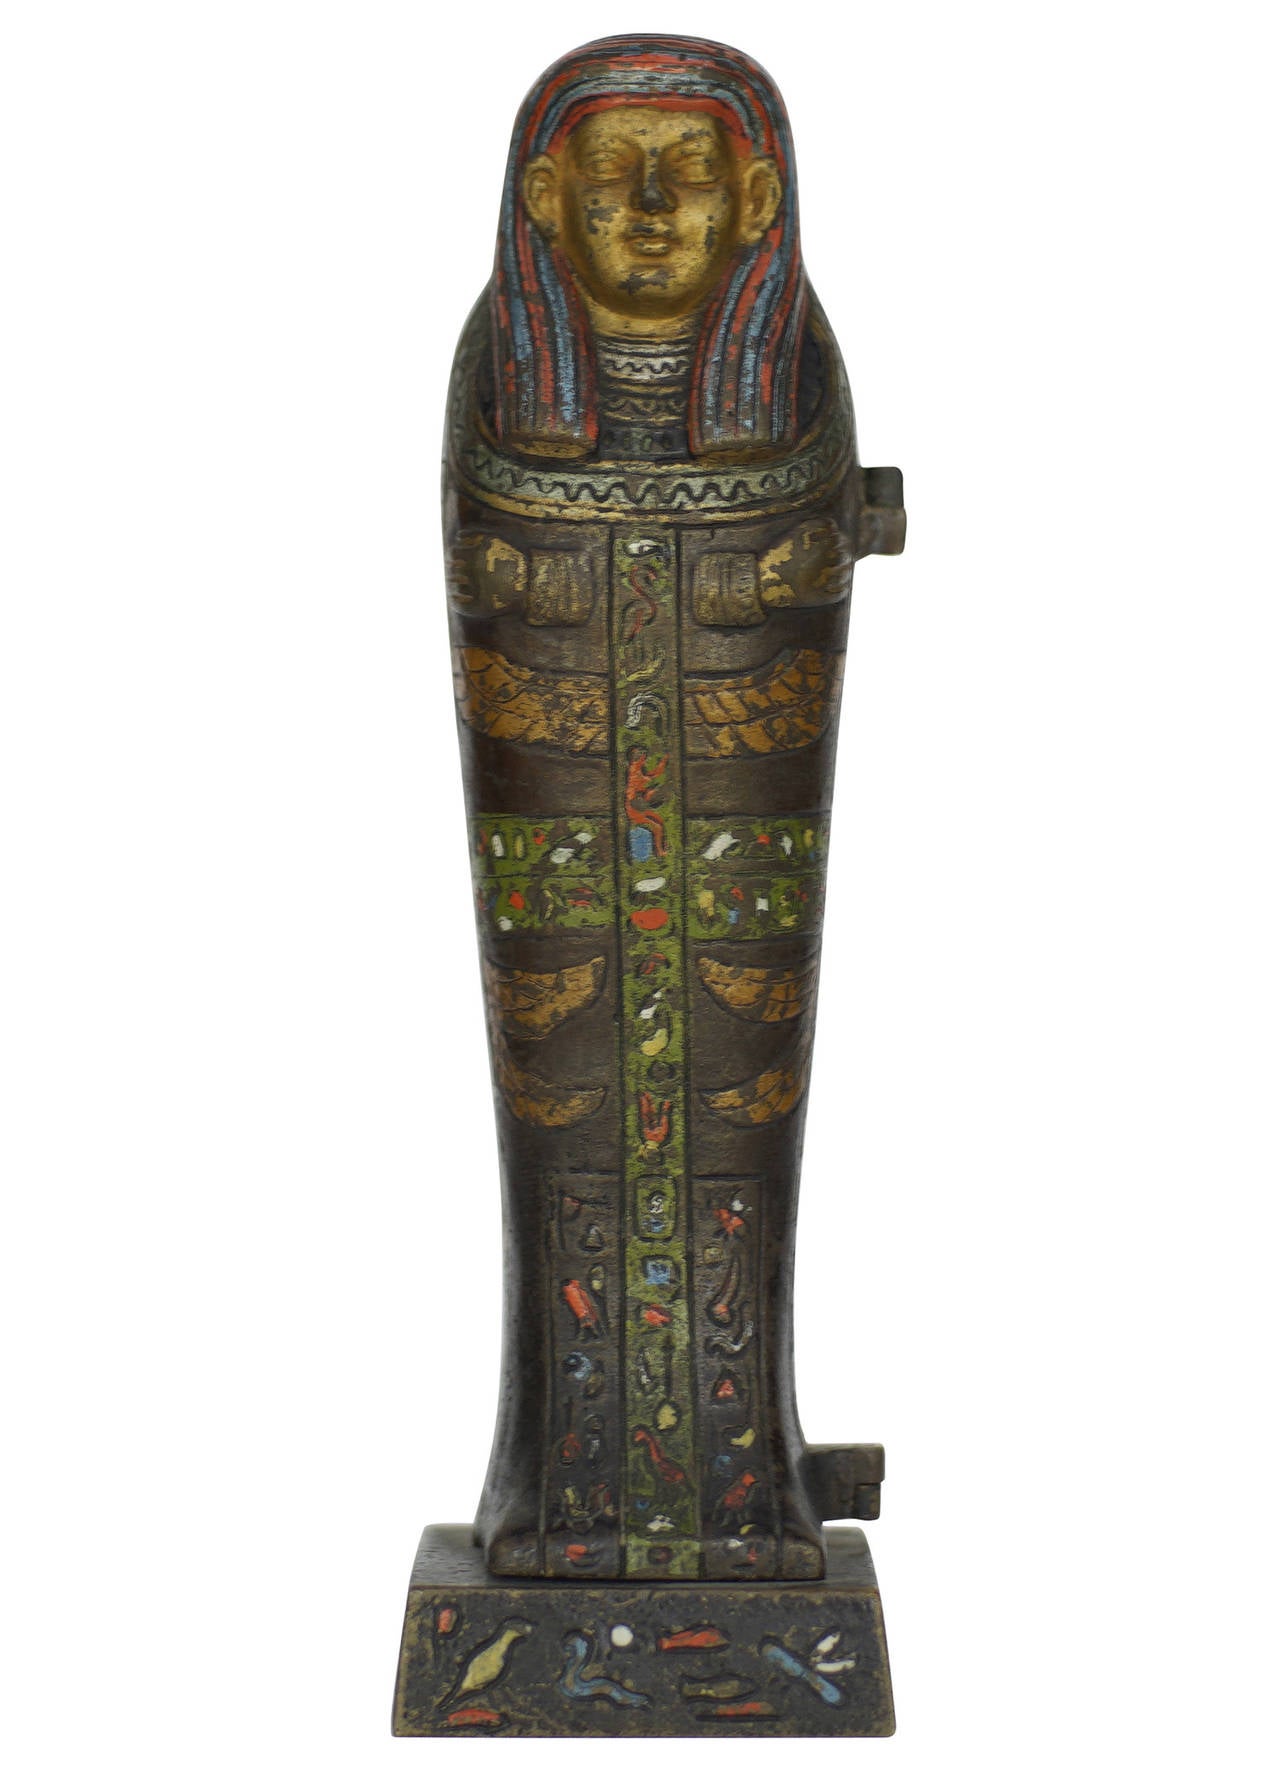 This piece is a Franz Xaver Bergmann cold painted Vienna bronze of an Egyptian sarcophagus decorated with small details and hieroglyphics. The sarcophagus opens on hinge to reveal a young nude nymph inside. 

This rare edition features a bronze